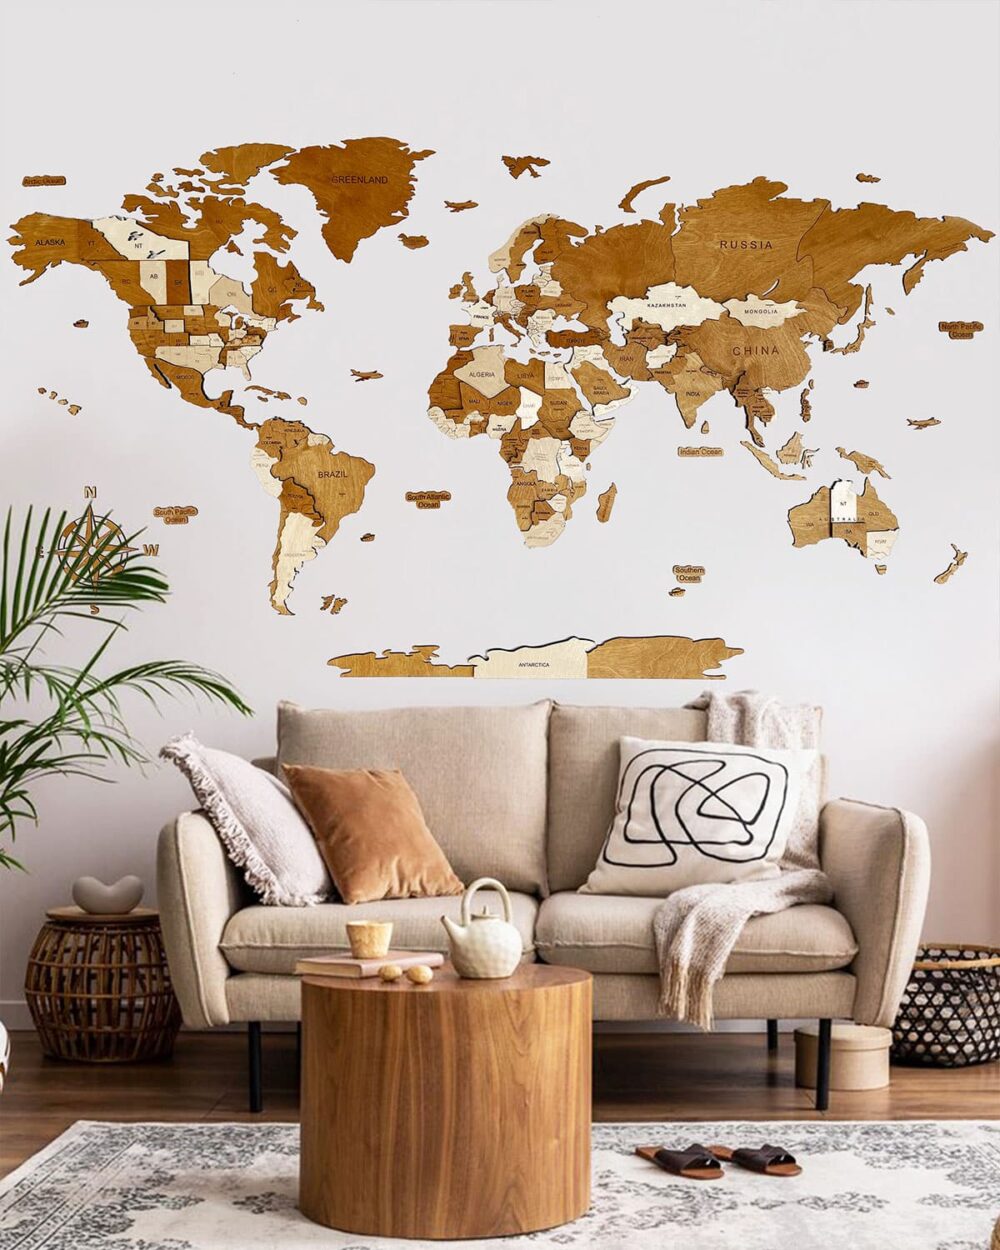 Wooden 3D wall map of the world | CAPPUCCINO Birdywing™